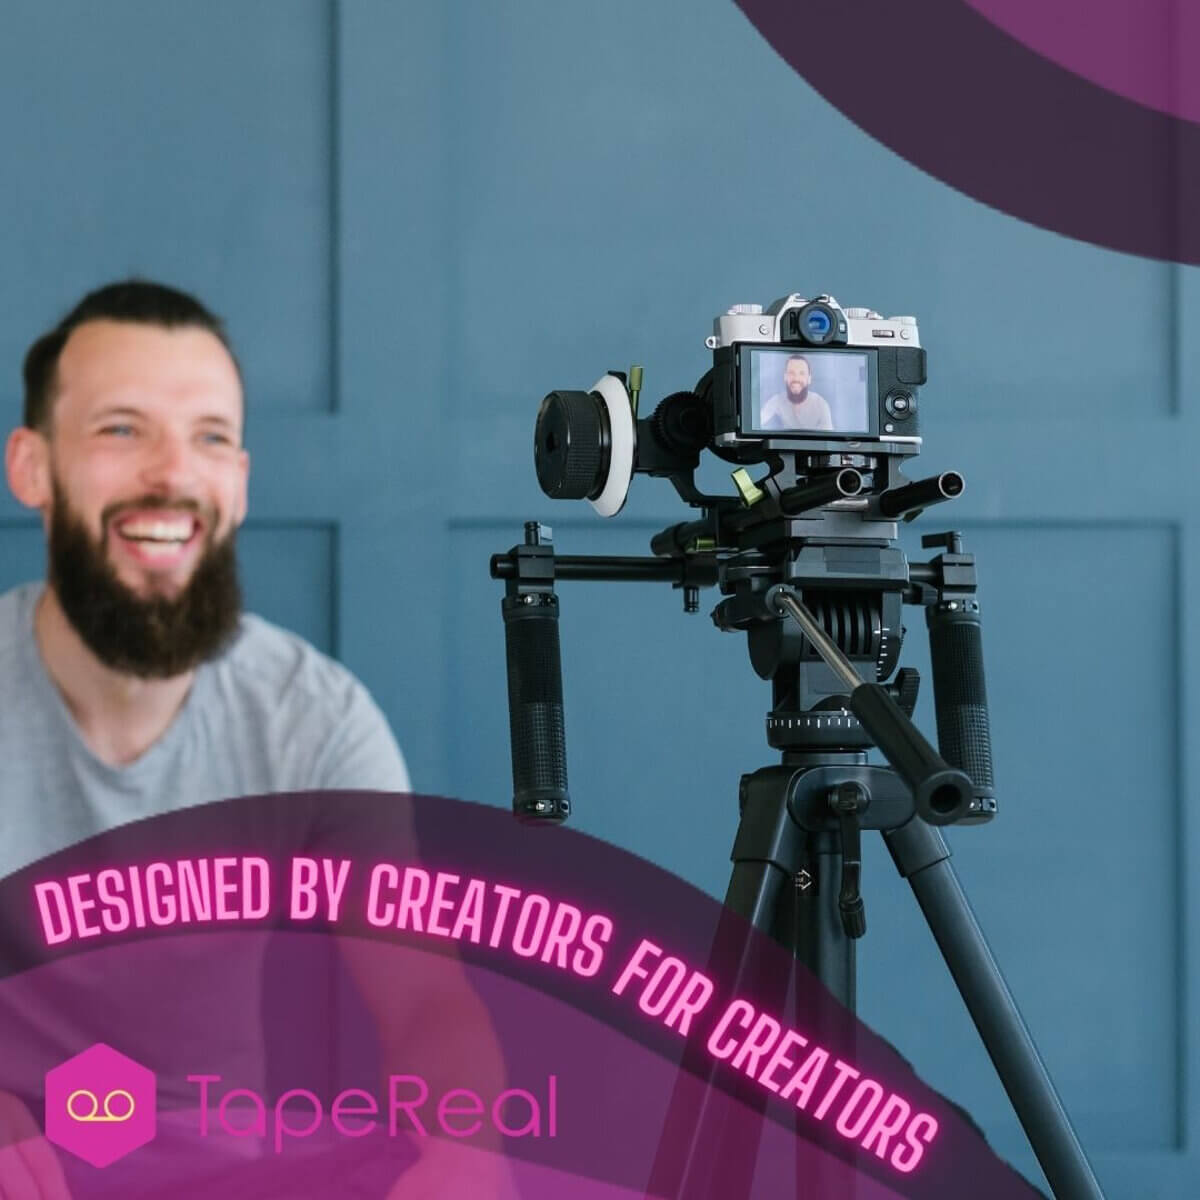 TapeReal is "designed by creators for creators." Man smiles as he films himself. 